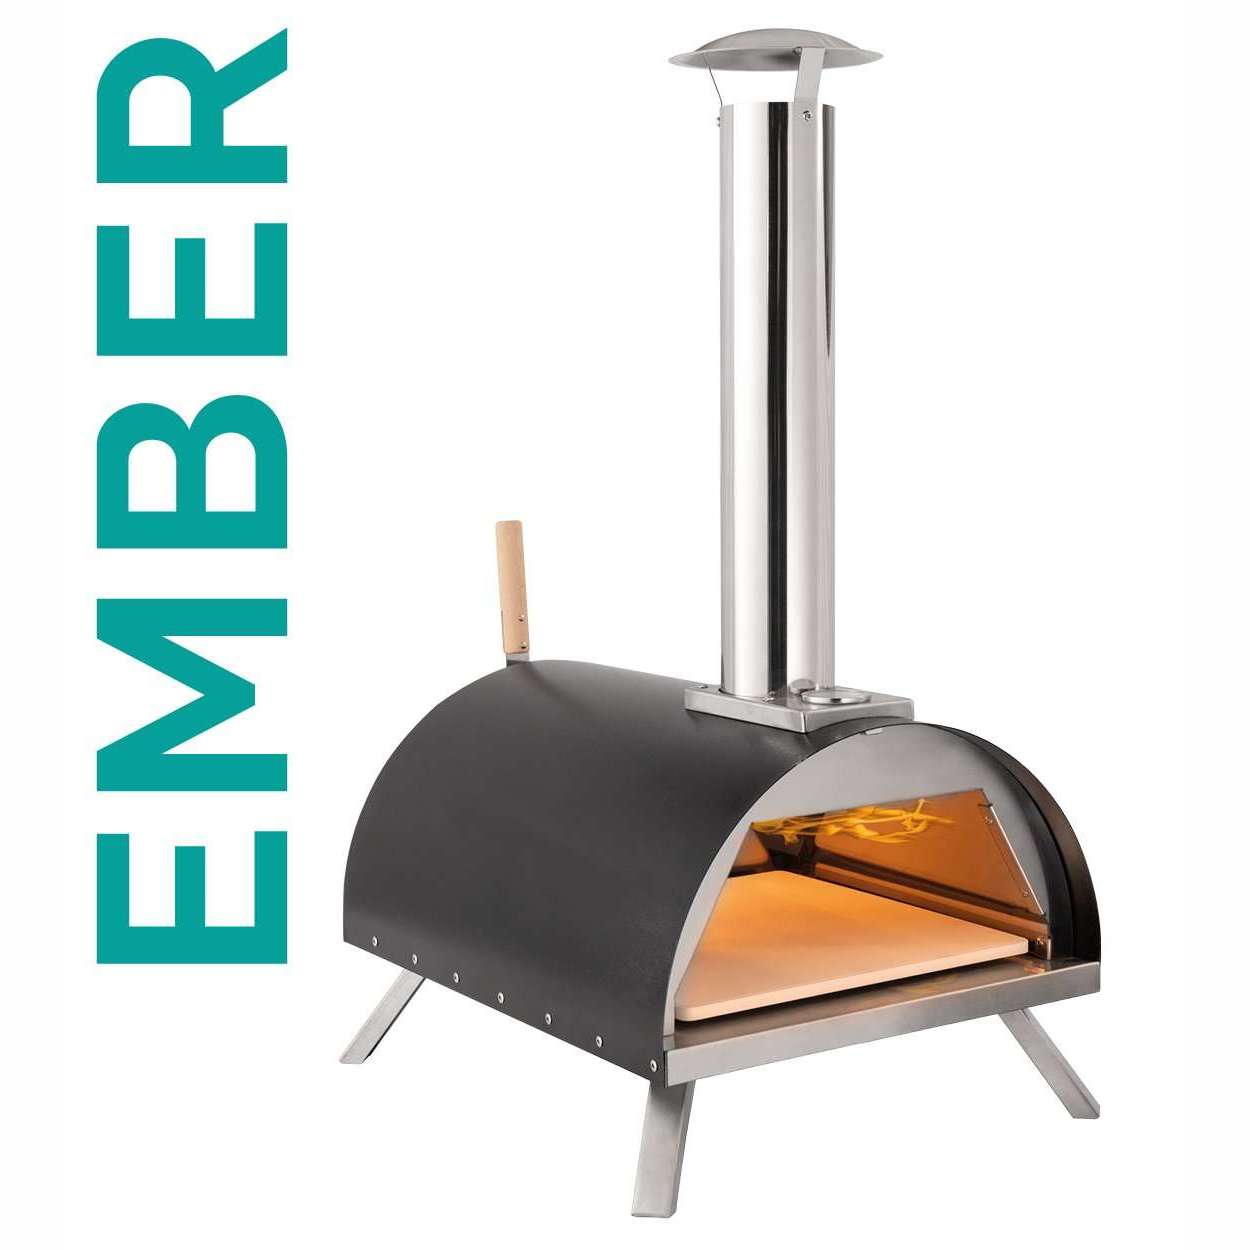 Exceptional Garden:Alfresco Chef Ember Wood Fired Outdoor Pizza Oven